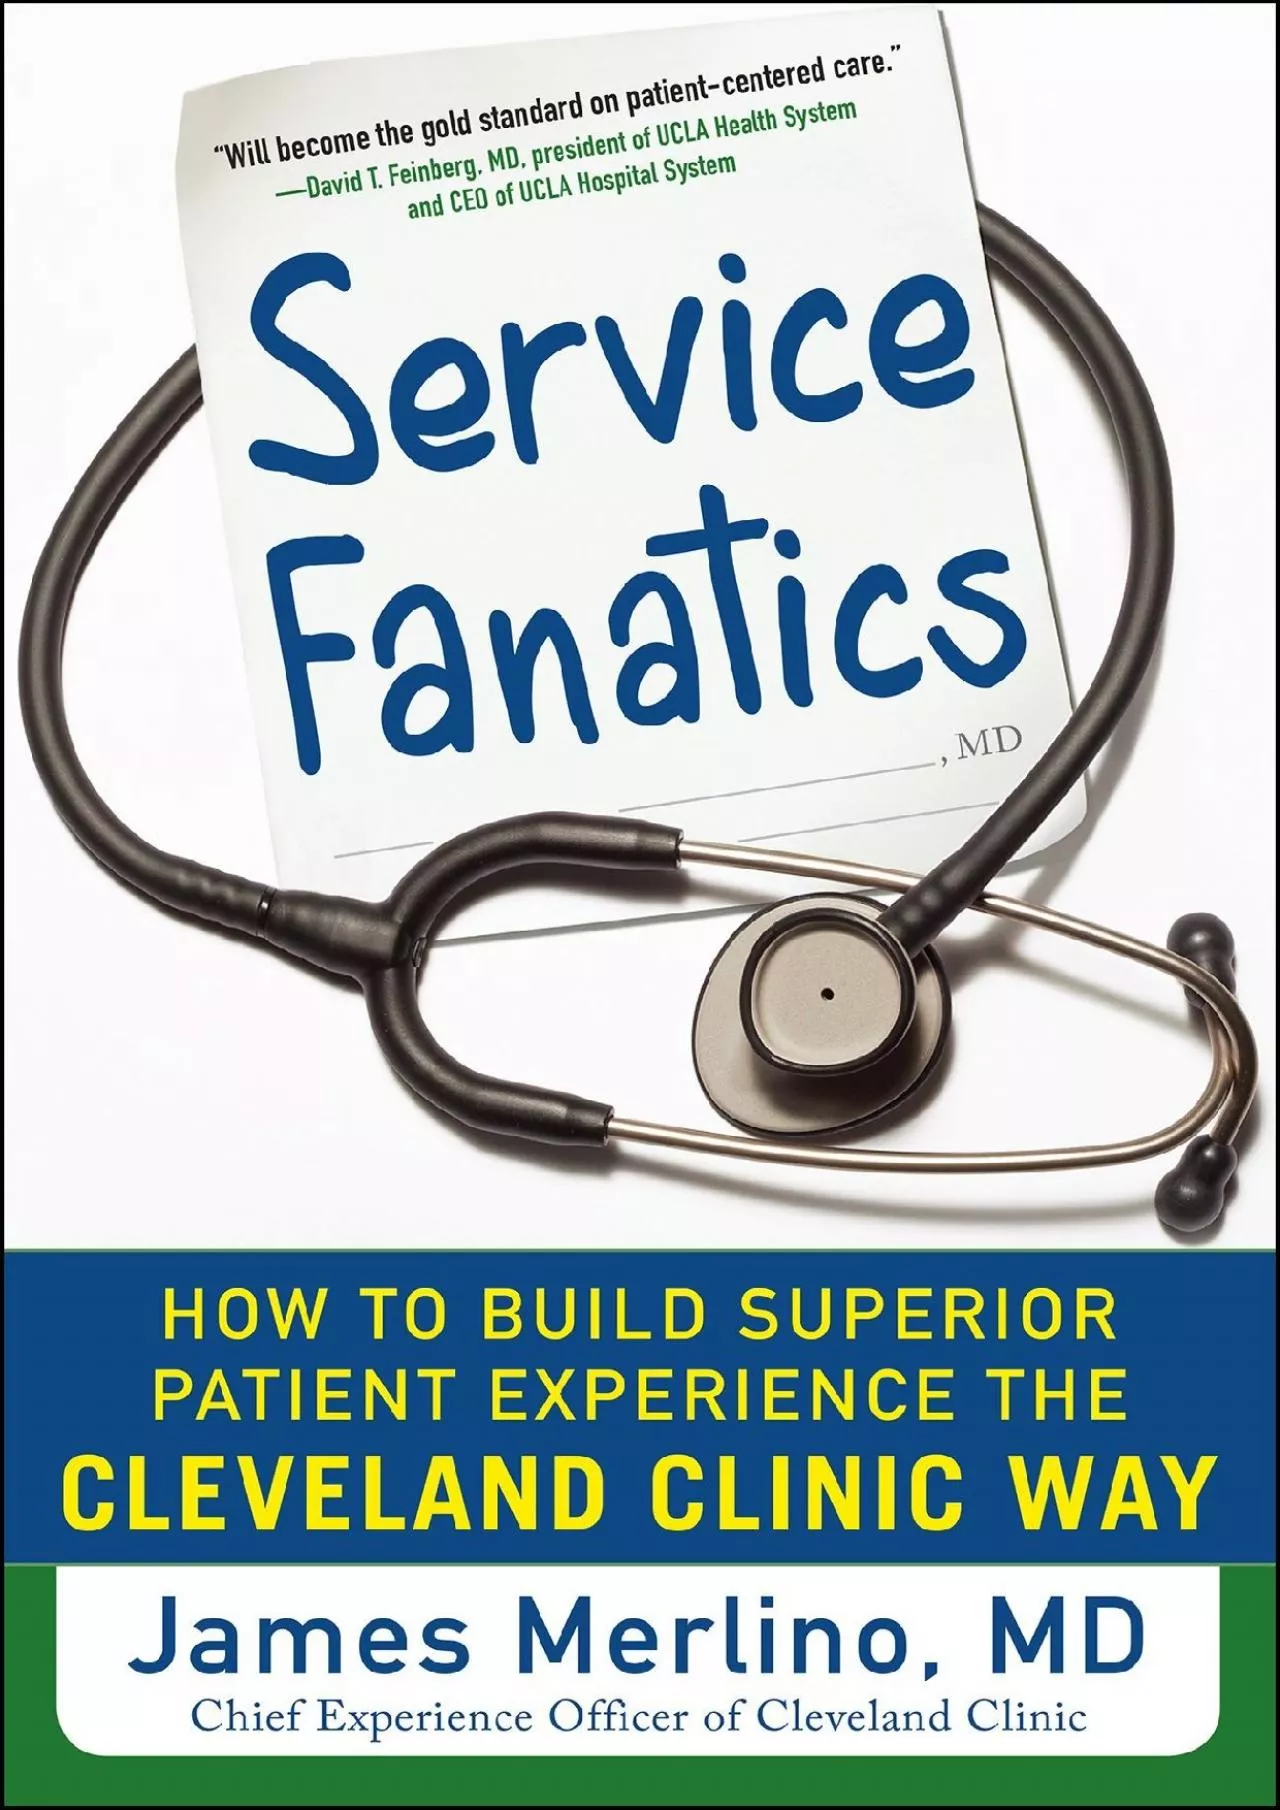 (BOOK)-Service Fanatics: How to Build Superior Patient Experience the Cleveland Clinic